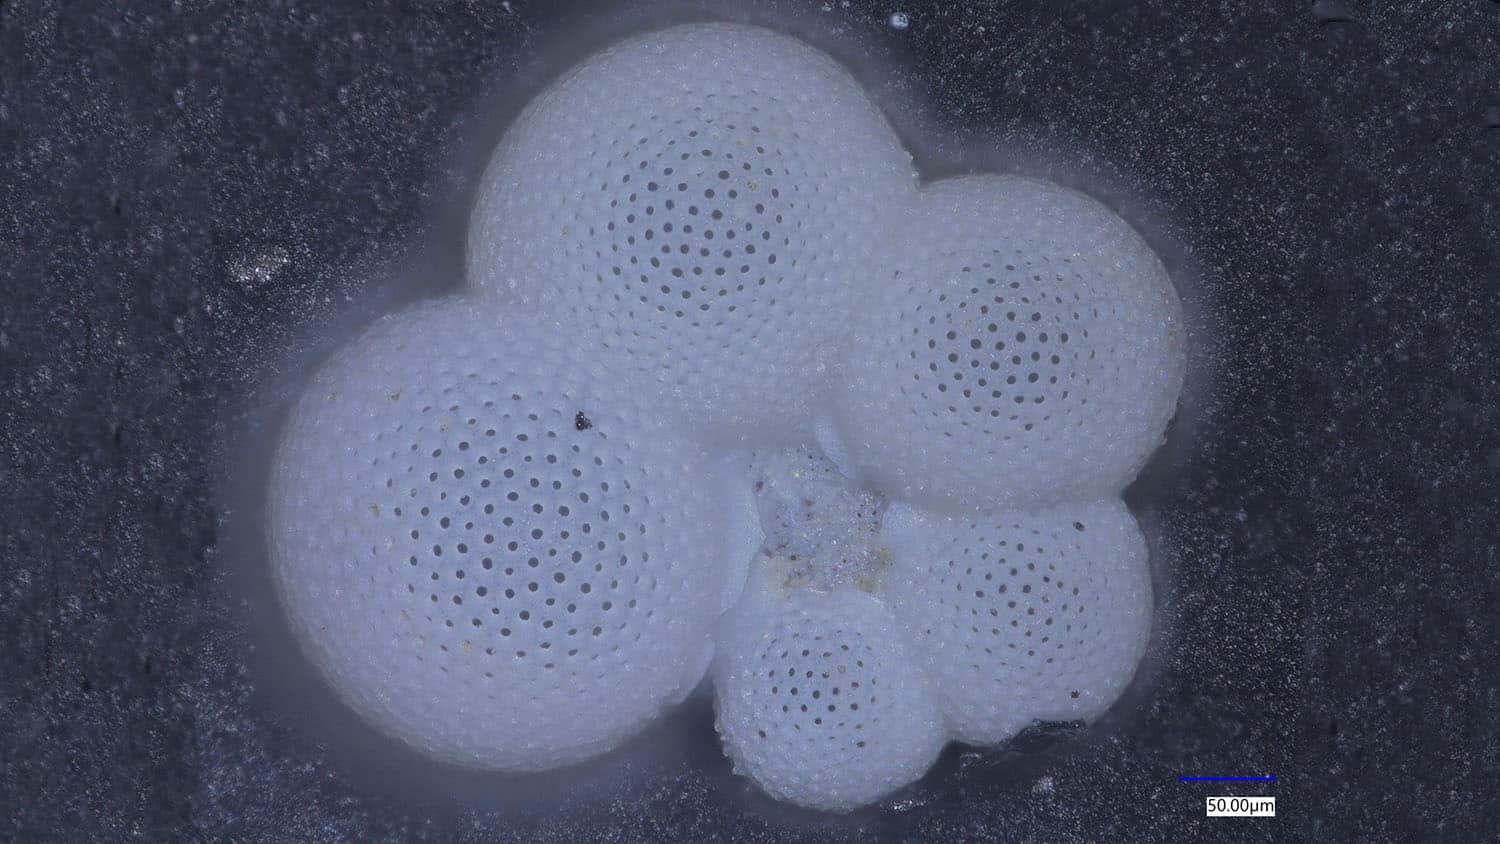 Globorataloides hexagonus shell recovered from a deep-sea sediment core in the tropical Pacific ocean